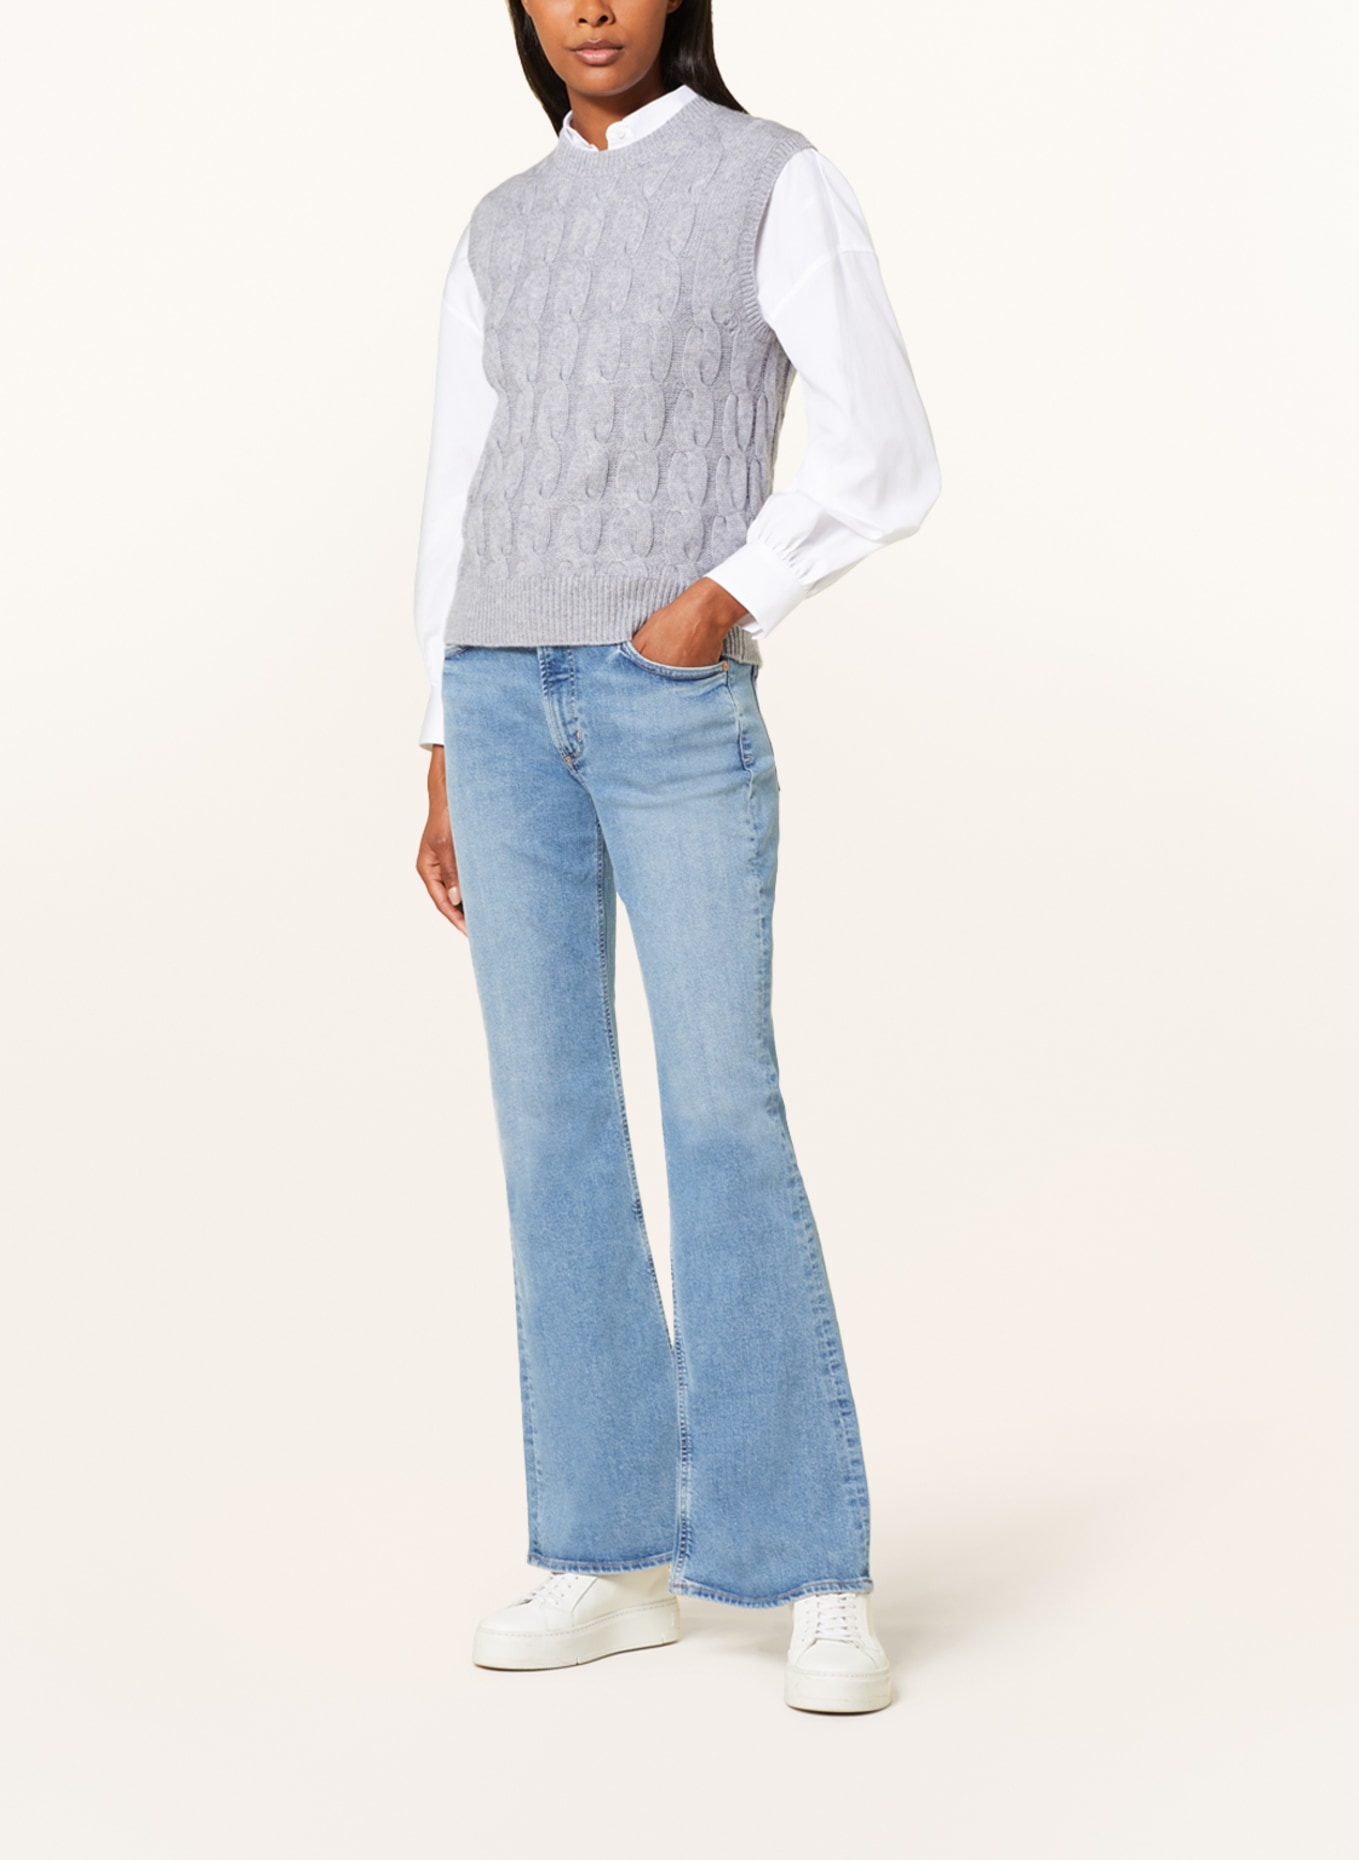 lilienfels Sweater vest with cashmere, Color: GRAY (Image 2)